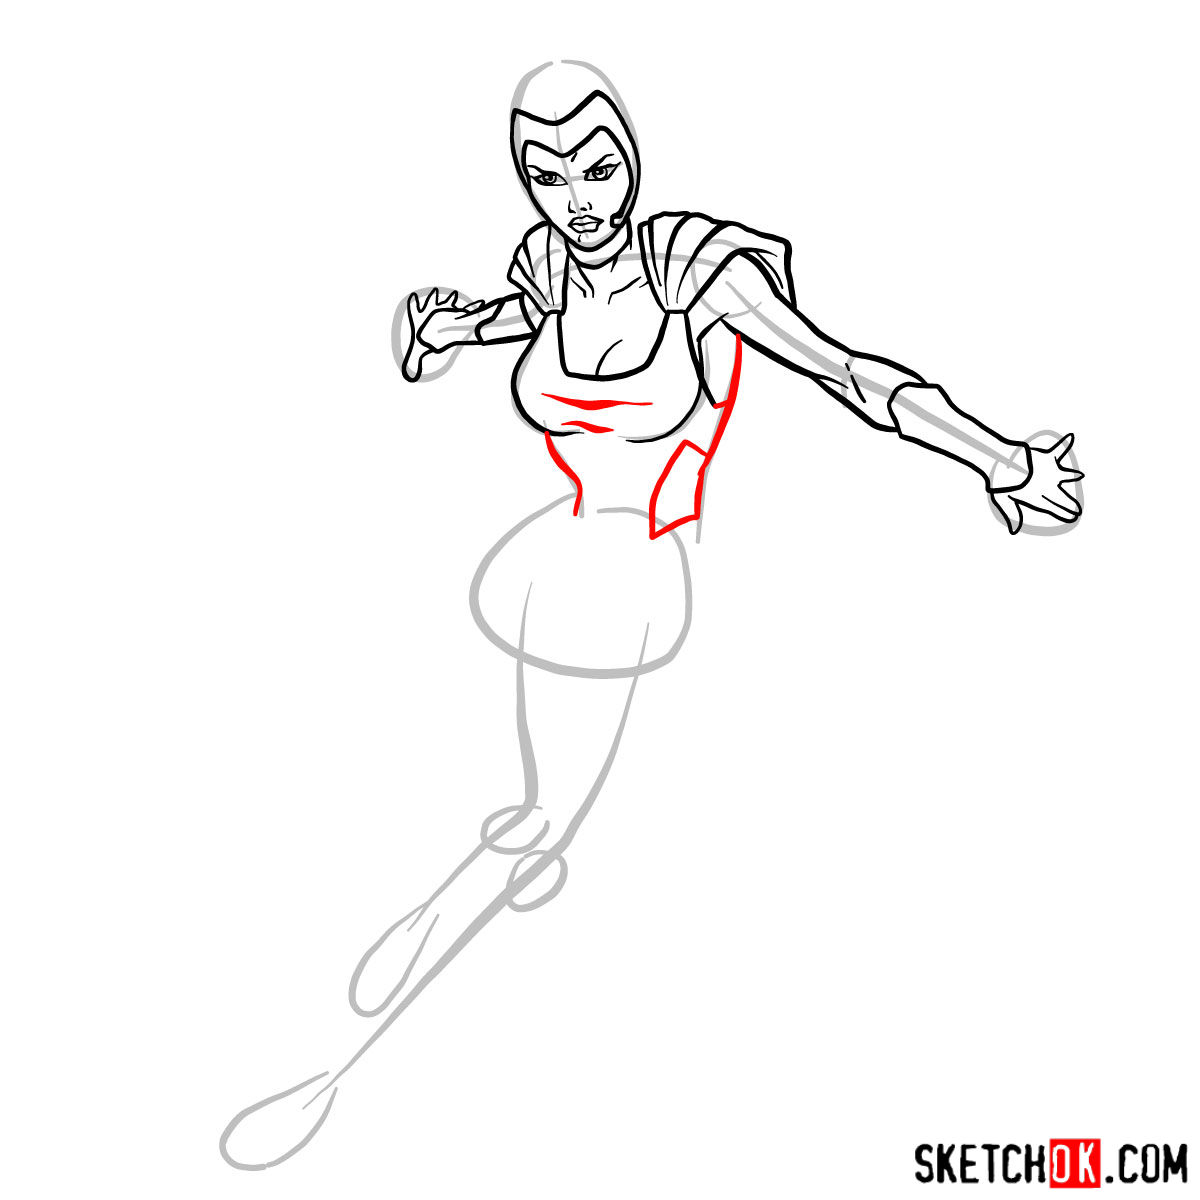 How to draw Polaris mutant from X-Men - step 08